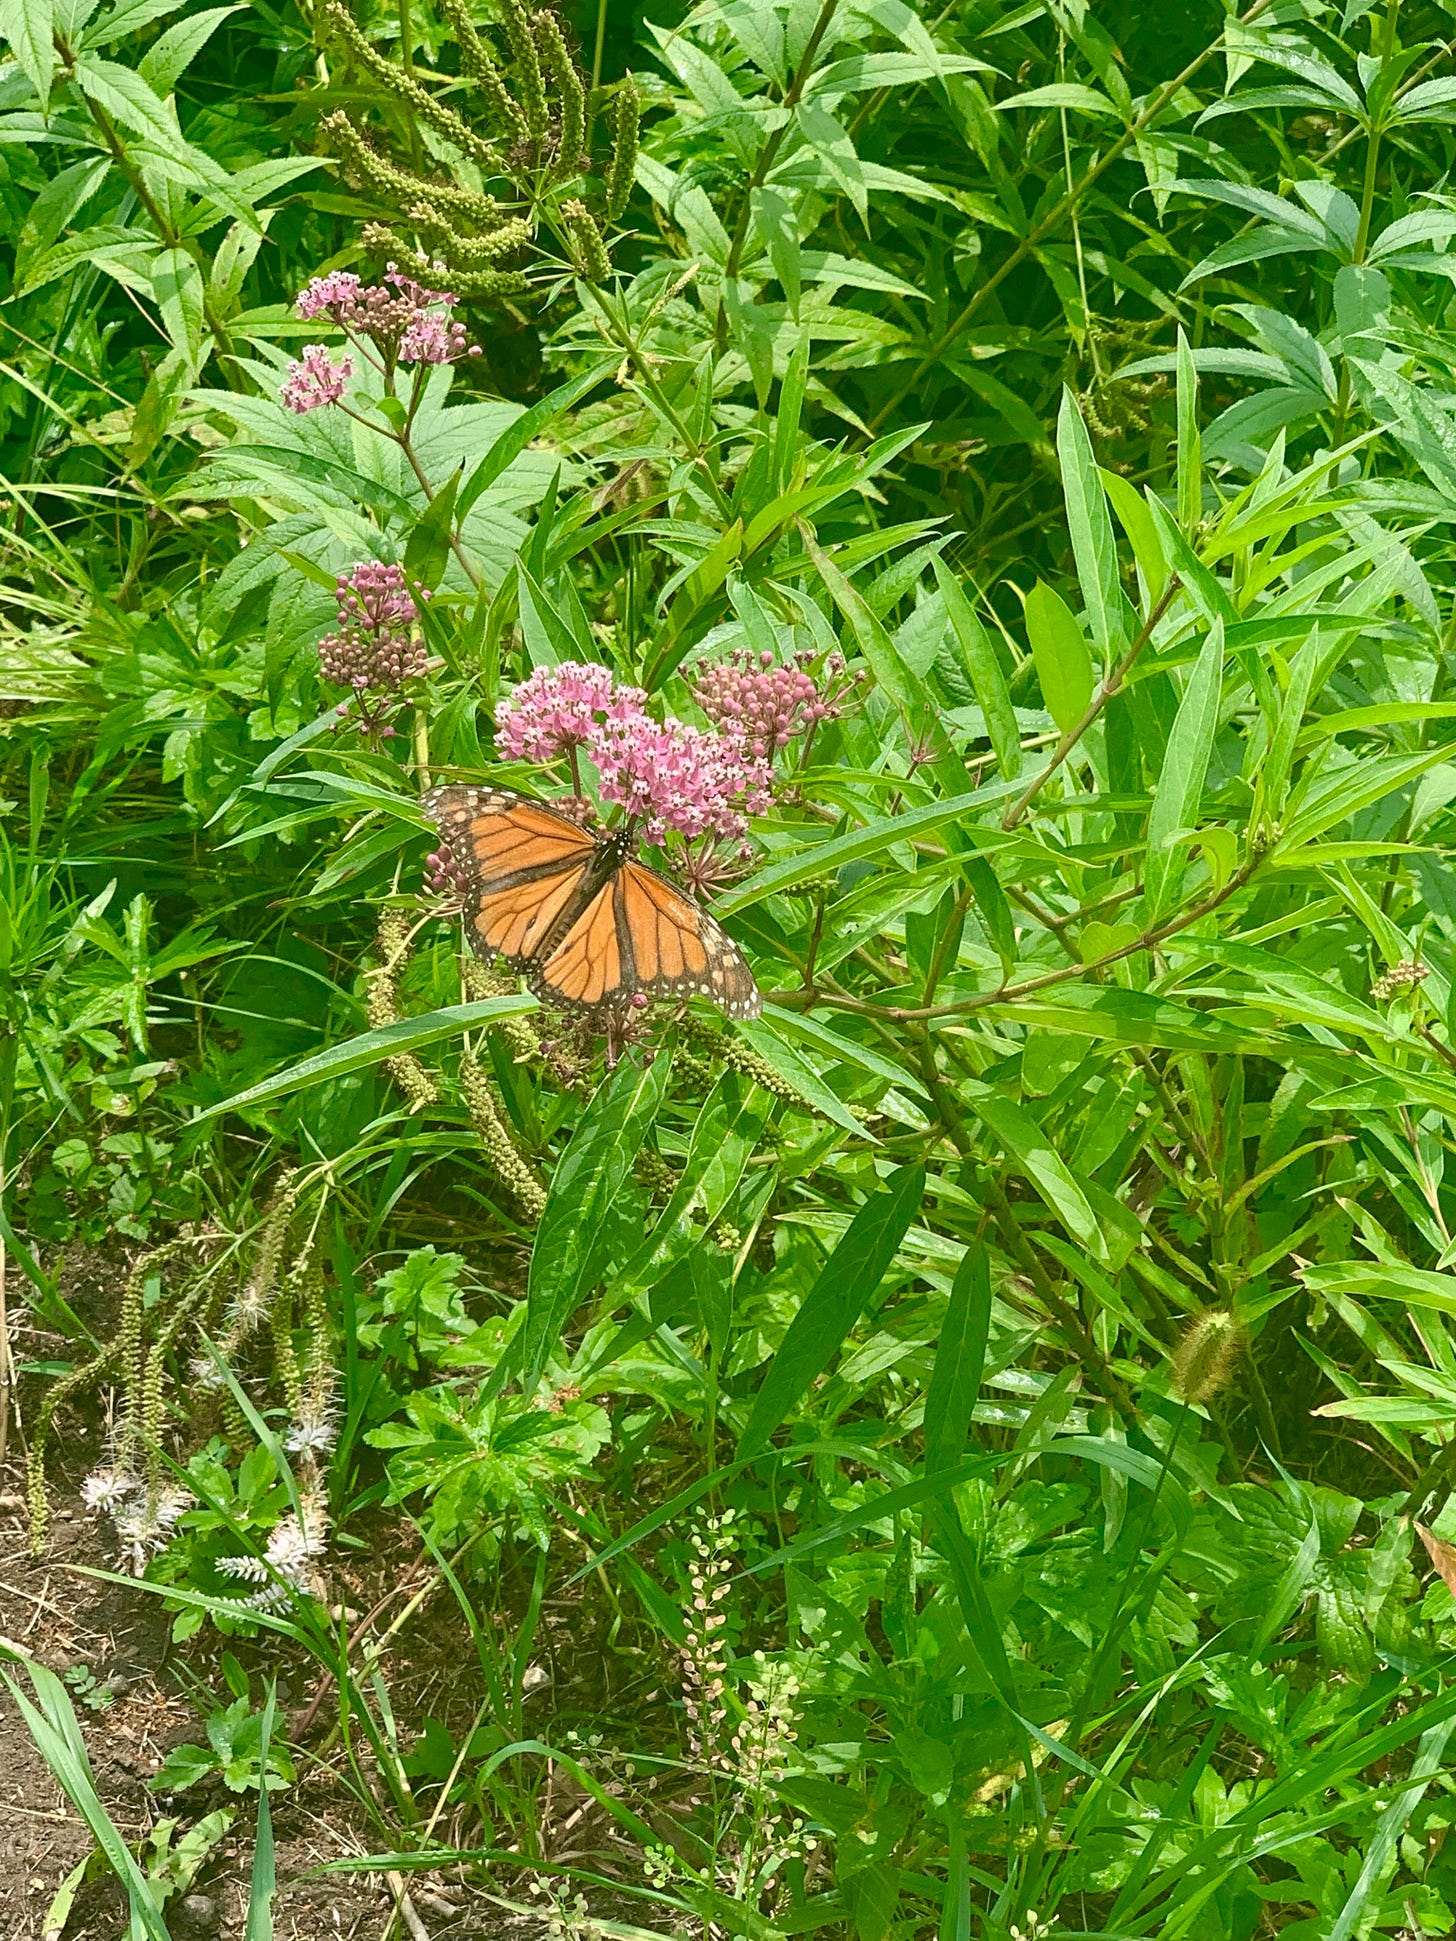 An orange and black butterfly sits, wings open, atop a small grouping of pink flowers.